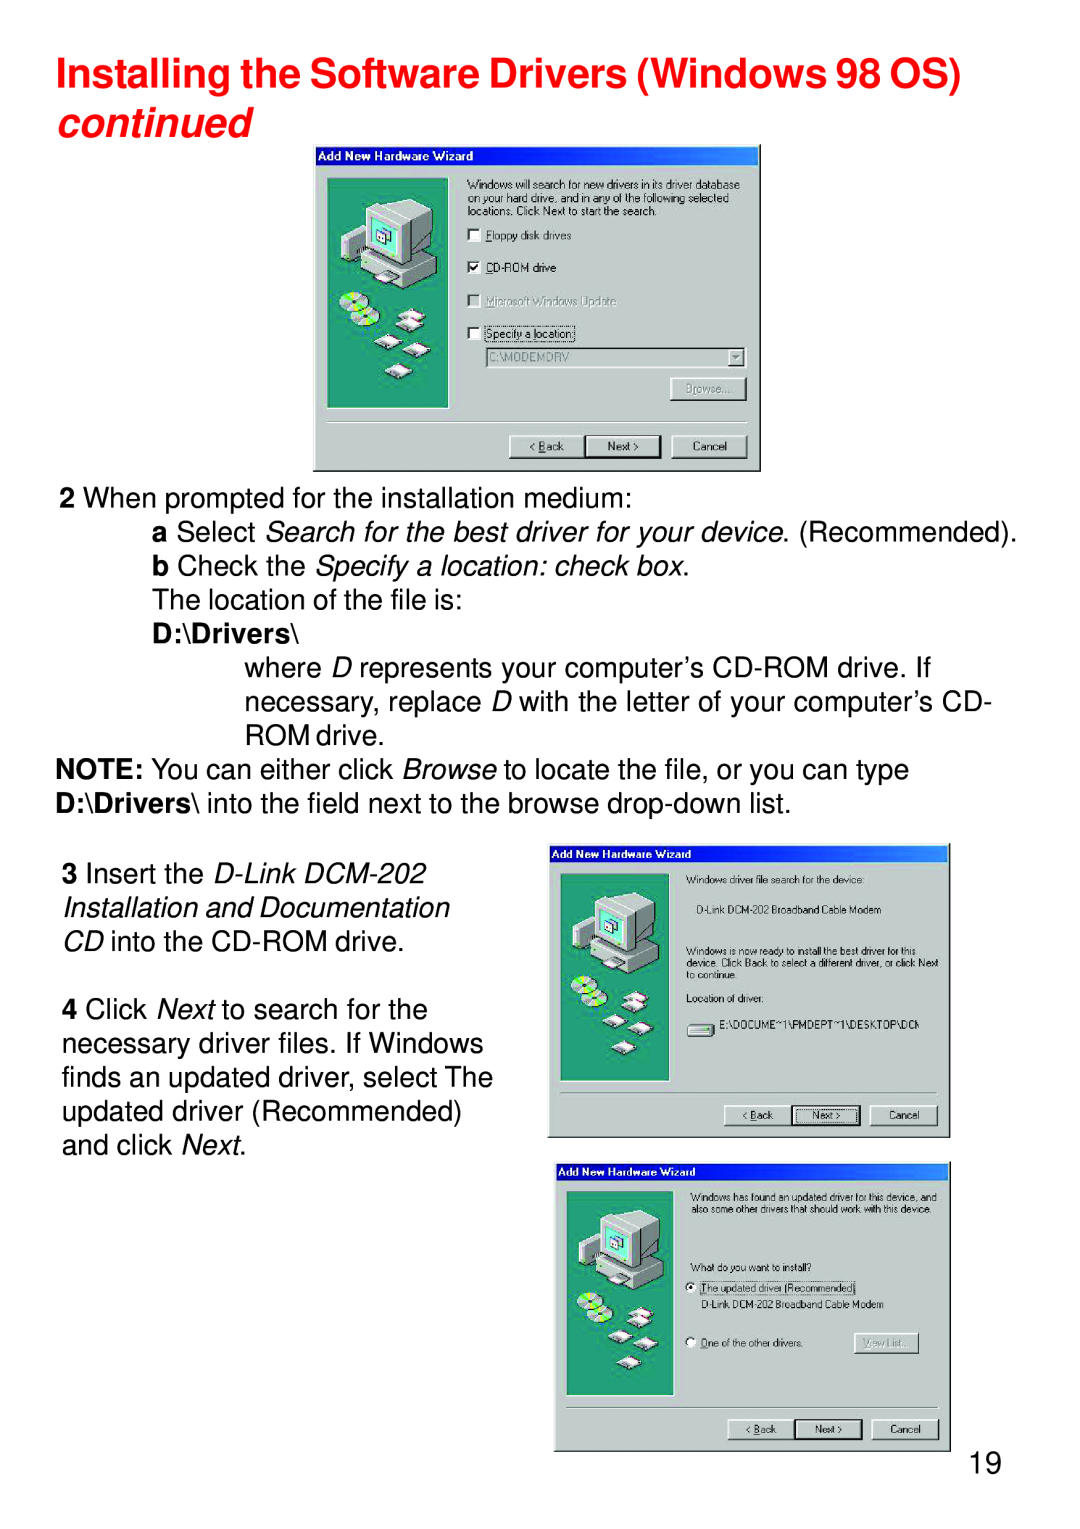 D-Link manual Installing the Software Drivers Windows 98 OS continued, D\Drivers, Insert the D-Link DCM-202 